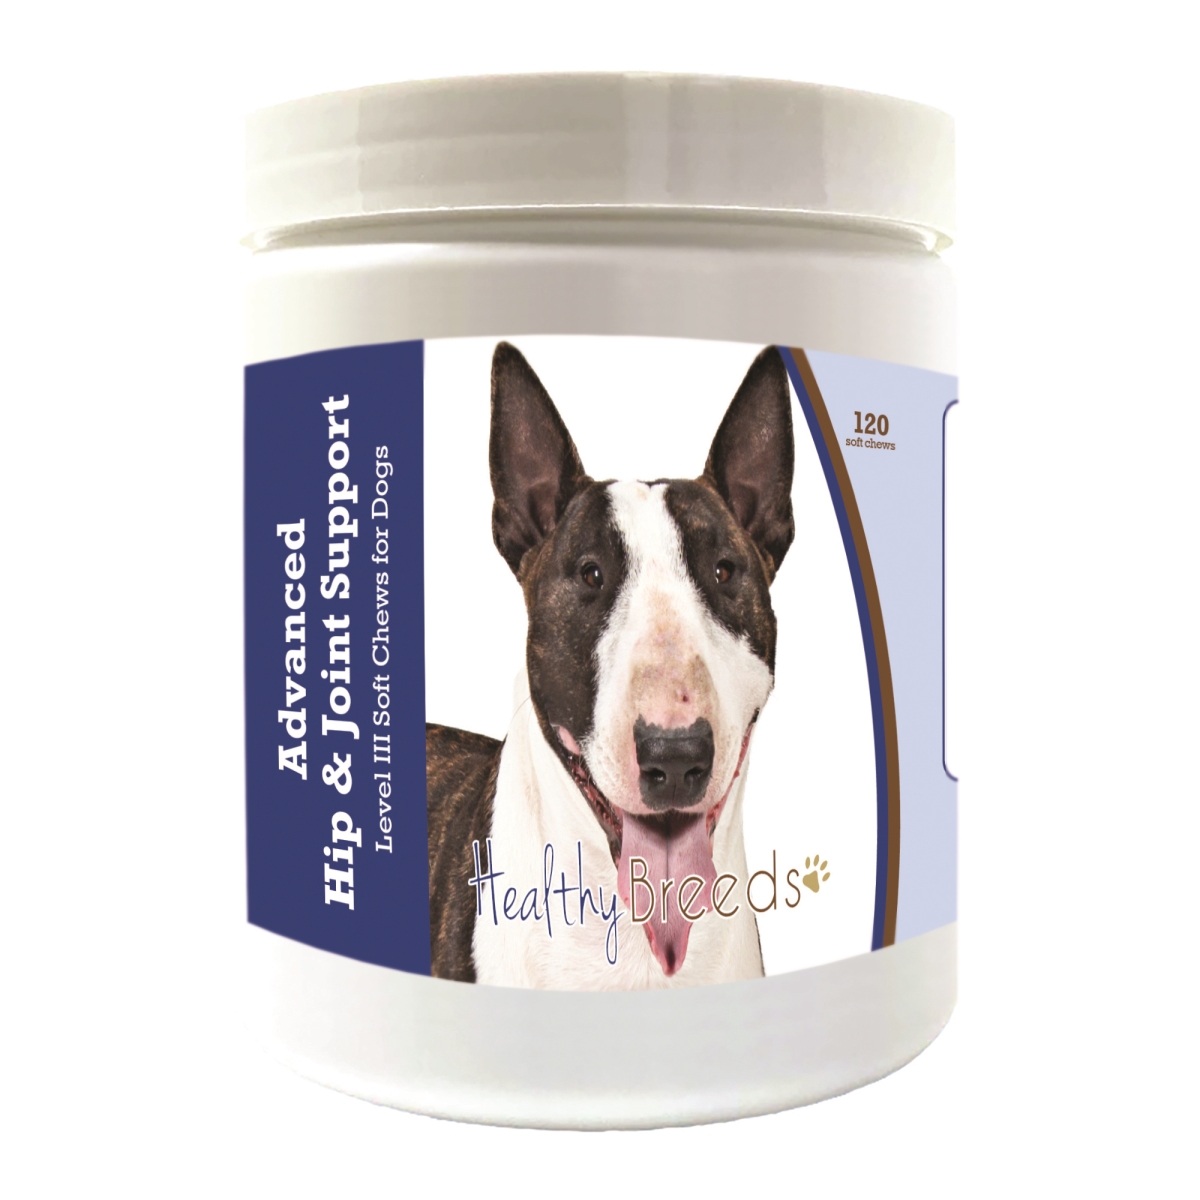 Picture of Healthy Breeds 192959898705 Miniature Bull Terrier Advanced Hip & Joint Support Level III Soft Chews for Dogs